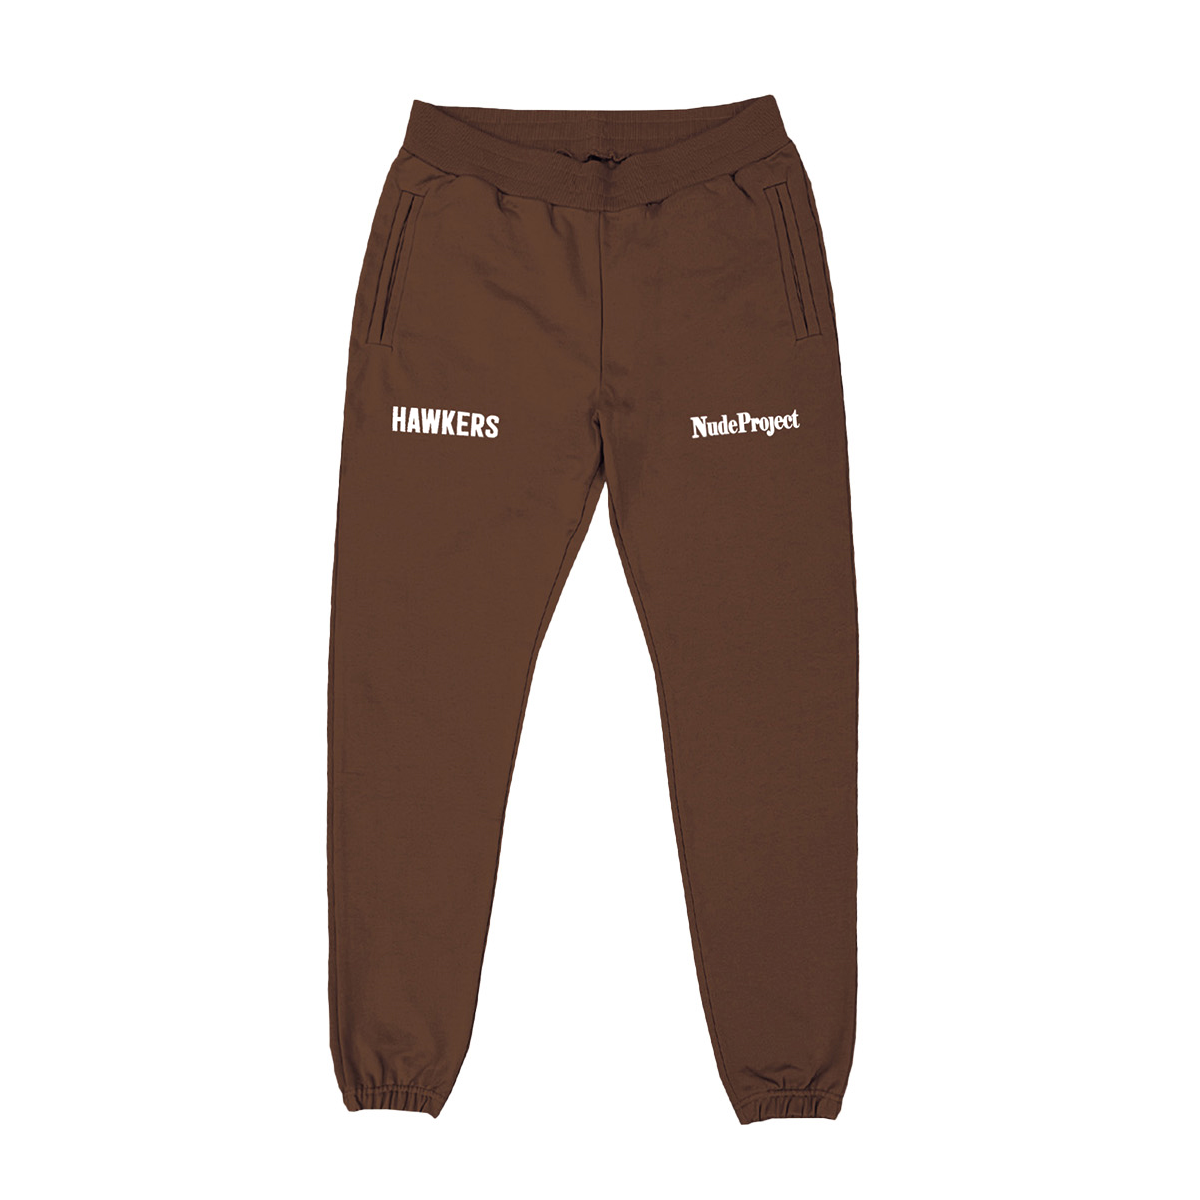 Hawkers X Nude - Motto Sweatpants (s)